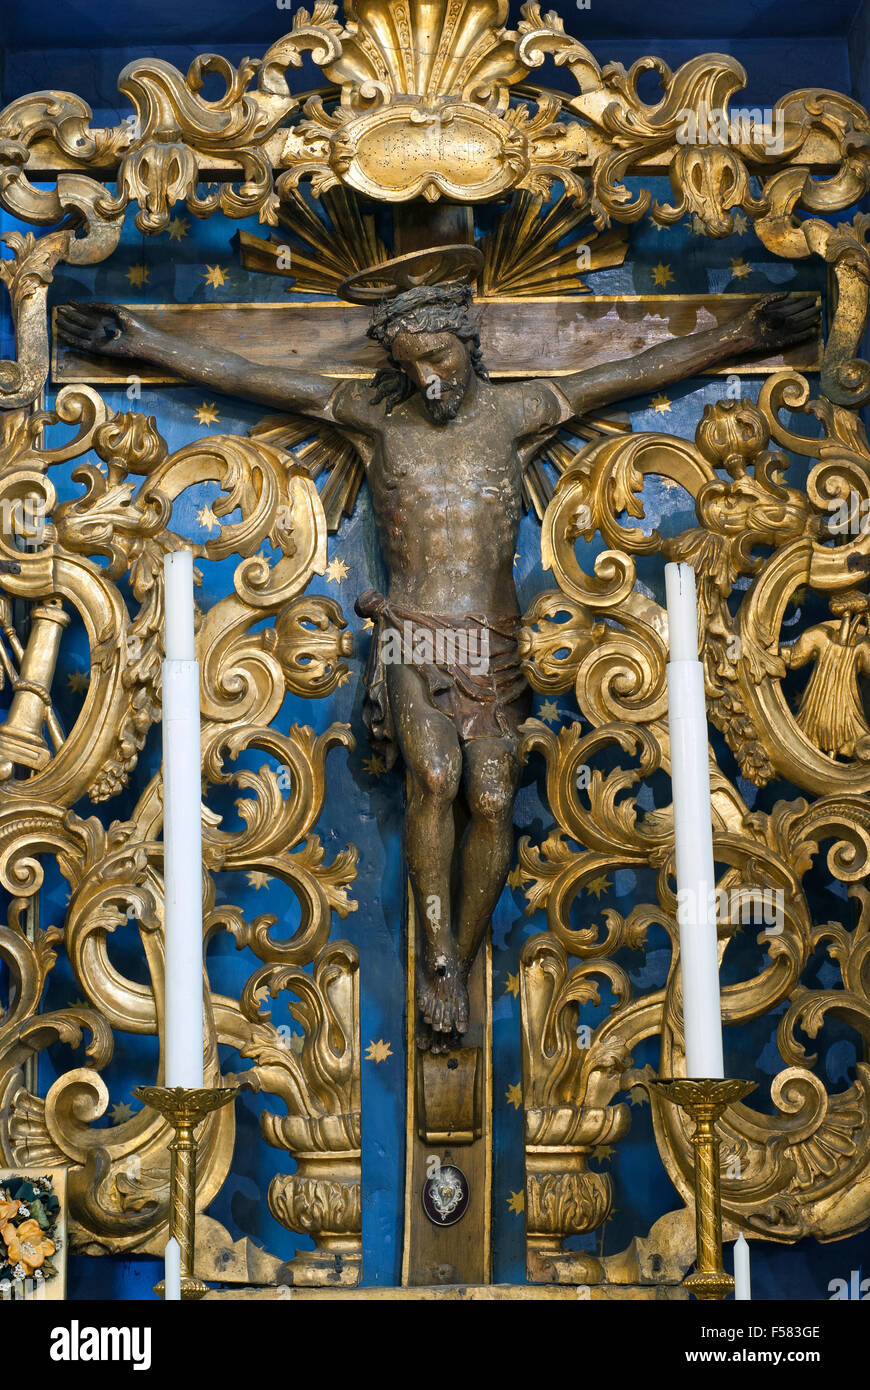 Wooden crucifix inside the church of San Silvestro Papa, Piegaro, medieval village in Umbria, Italy Stock Photo